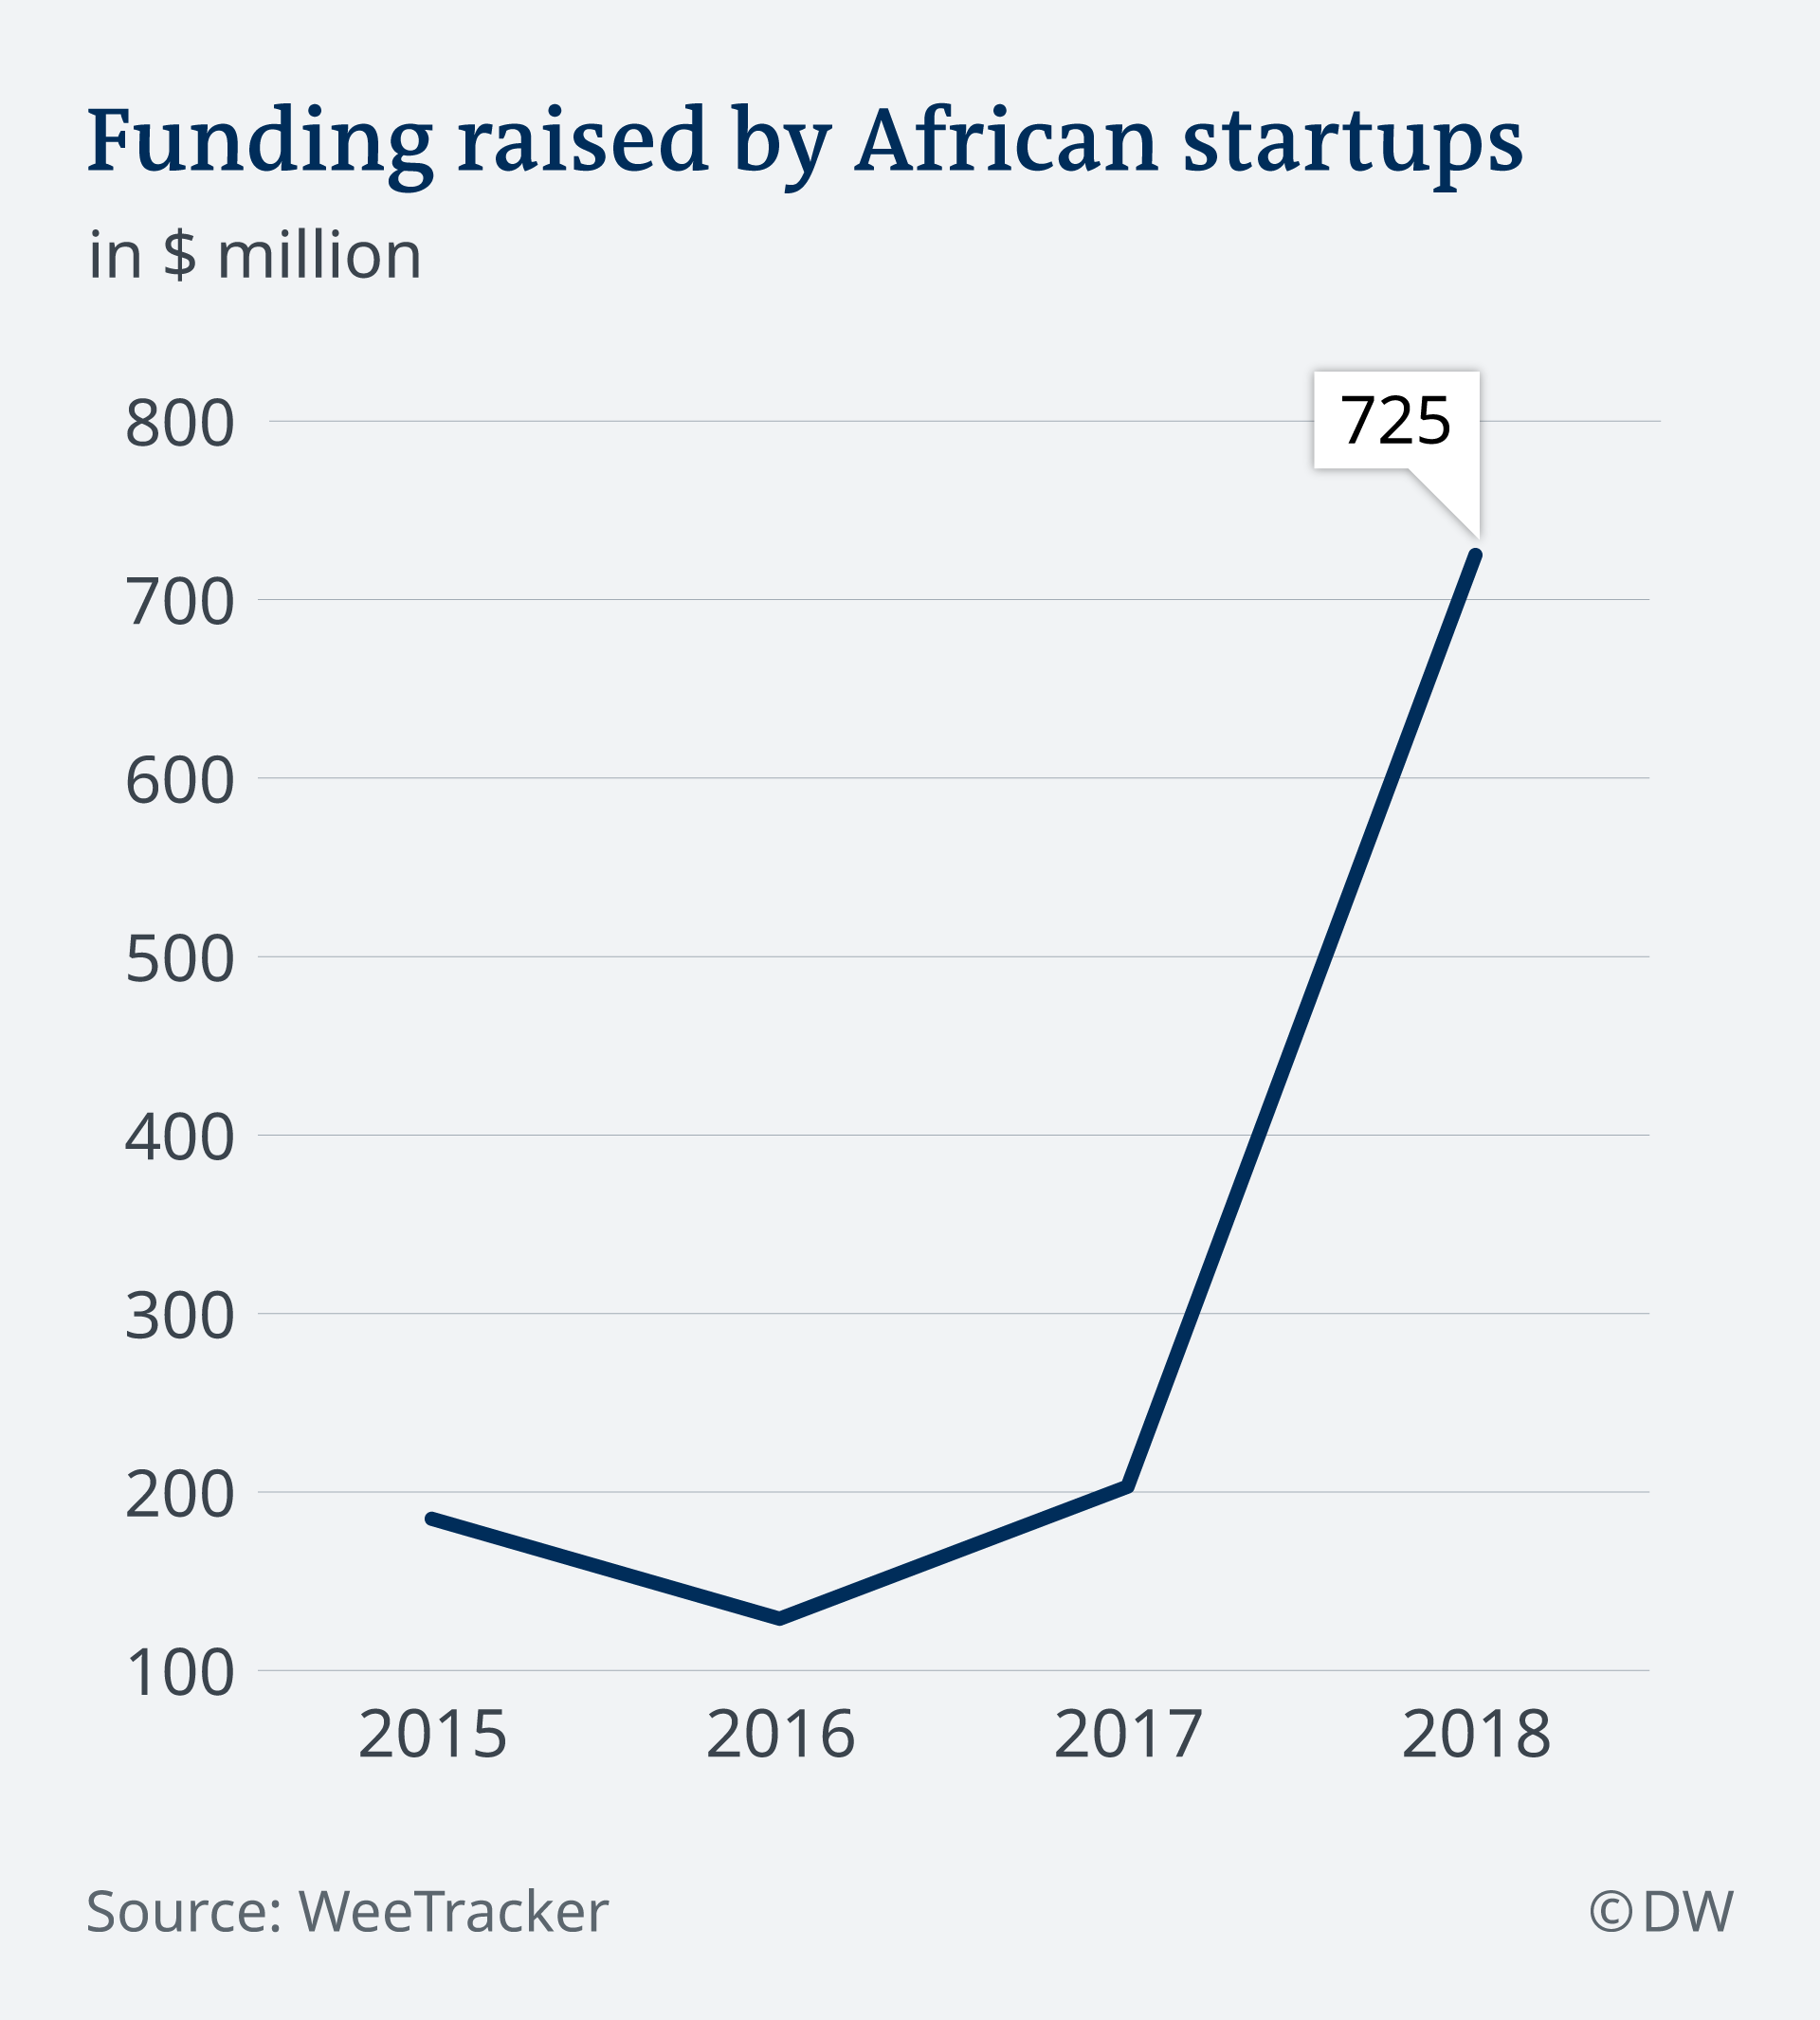 Infographic showing a sharp increase in funding for African startups since 2017 E